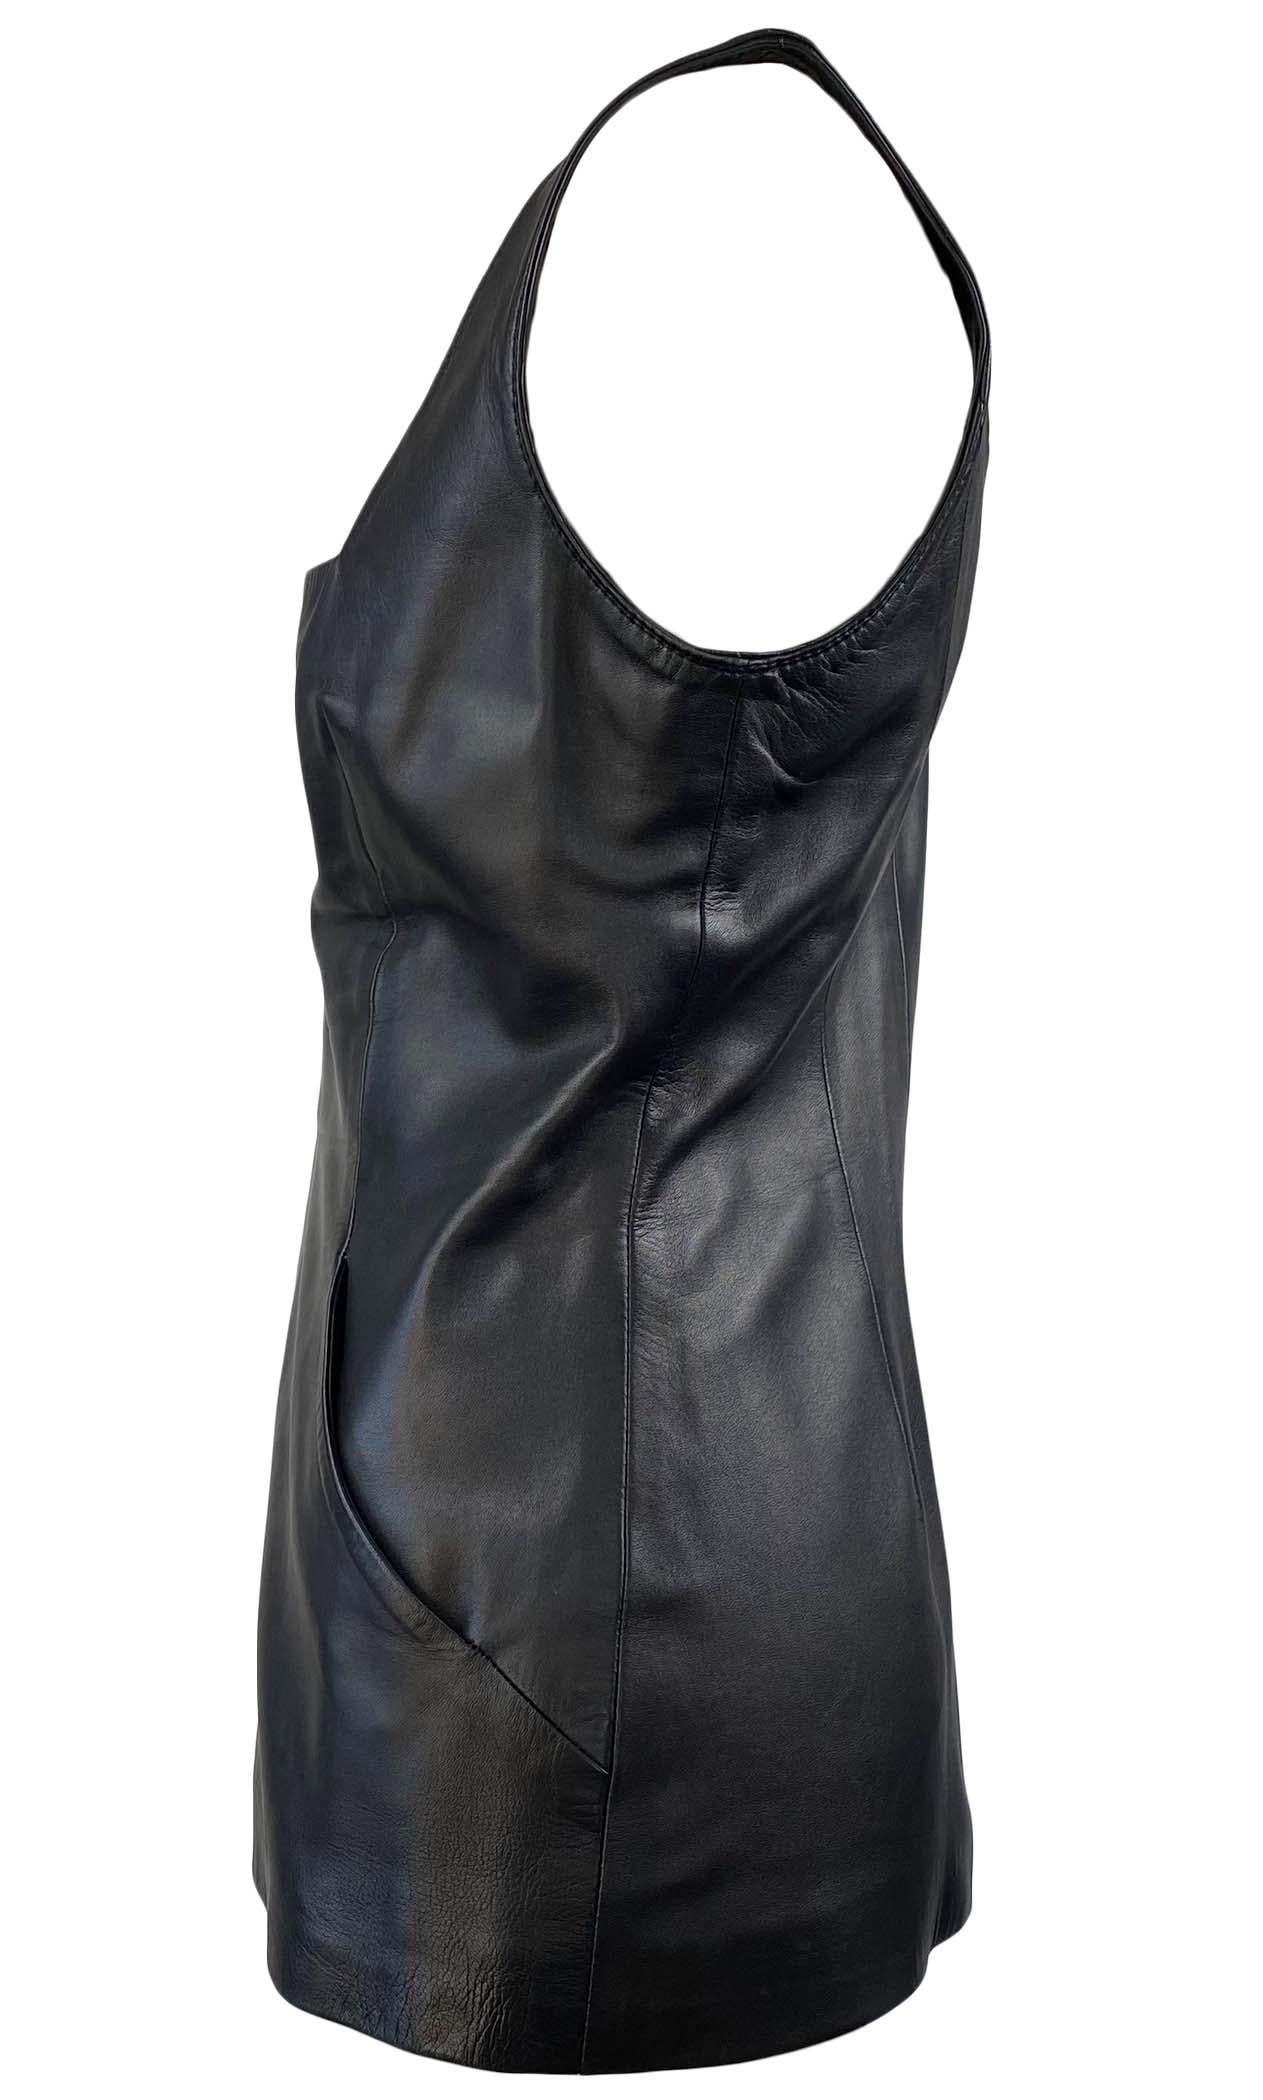 S/S 1997 Gucci by Tom Ford Leather Sleeveless Top G Logo In Good Condition For Sale In West Hollywood, CA